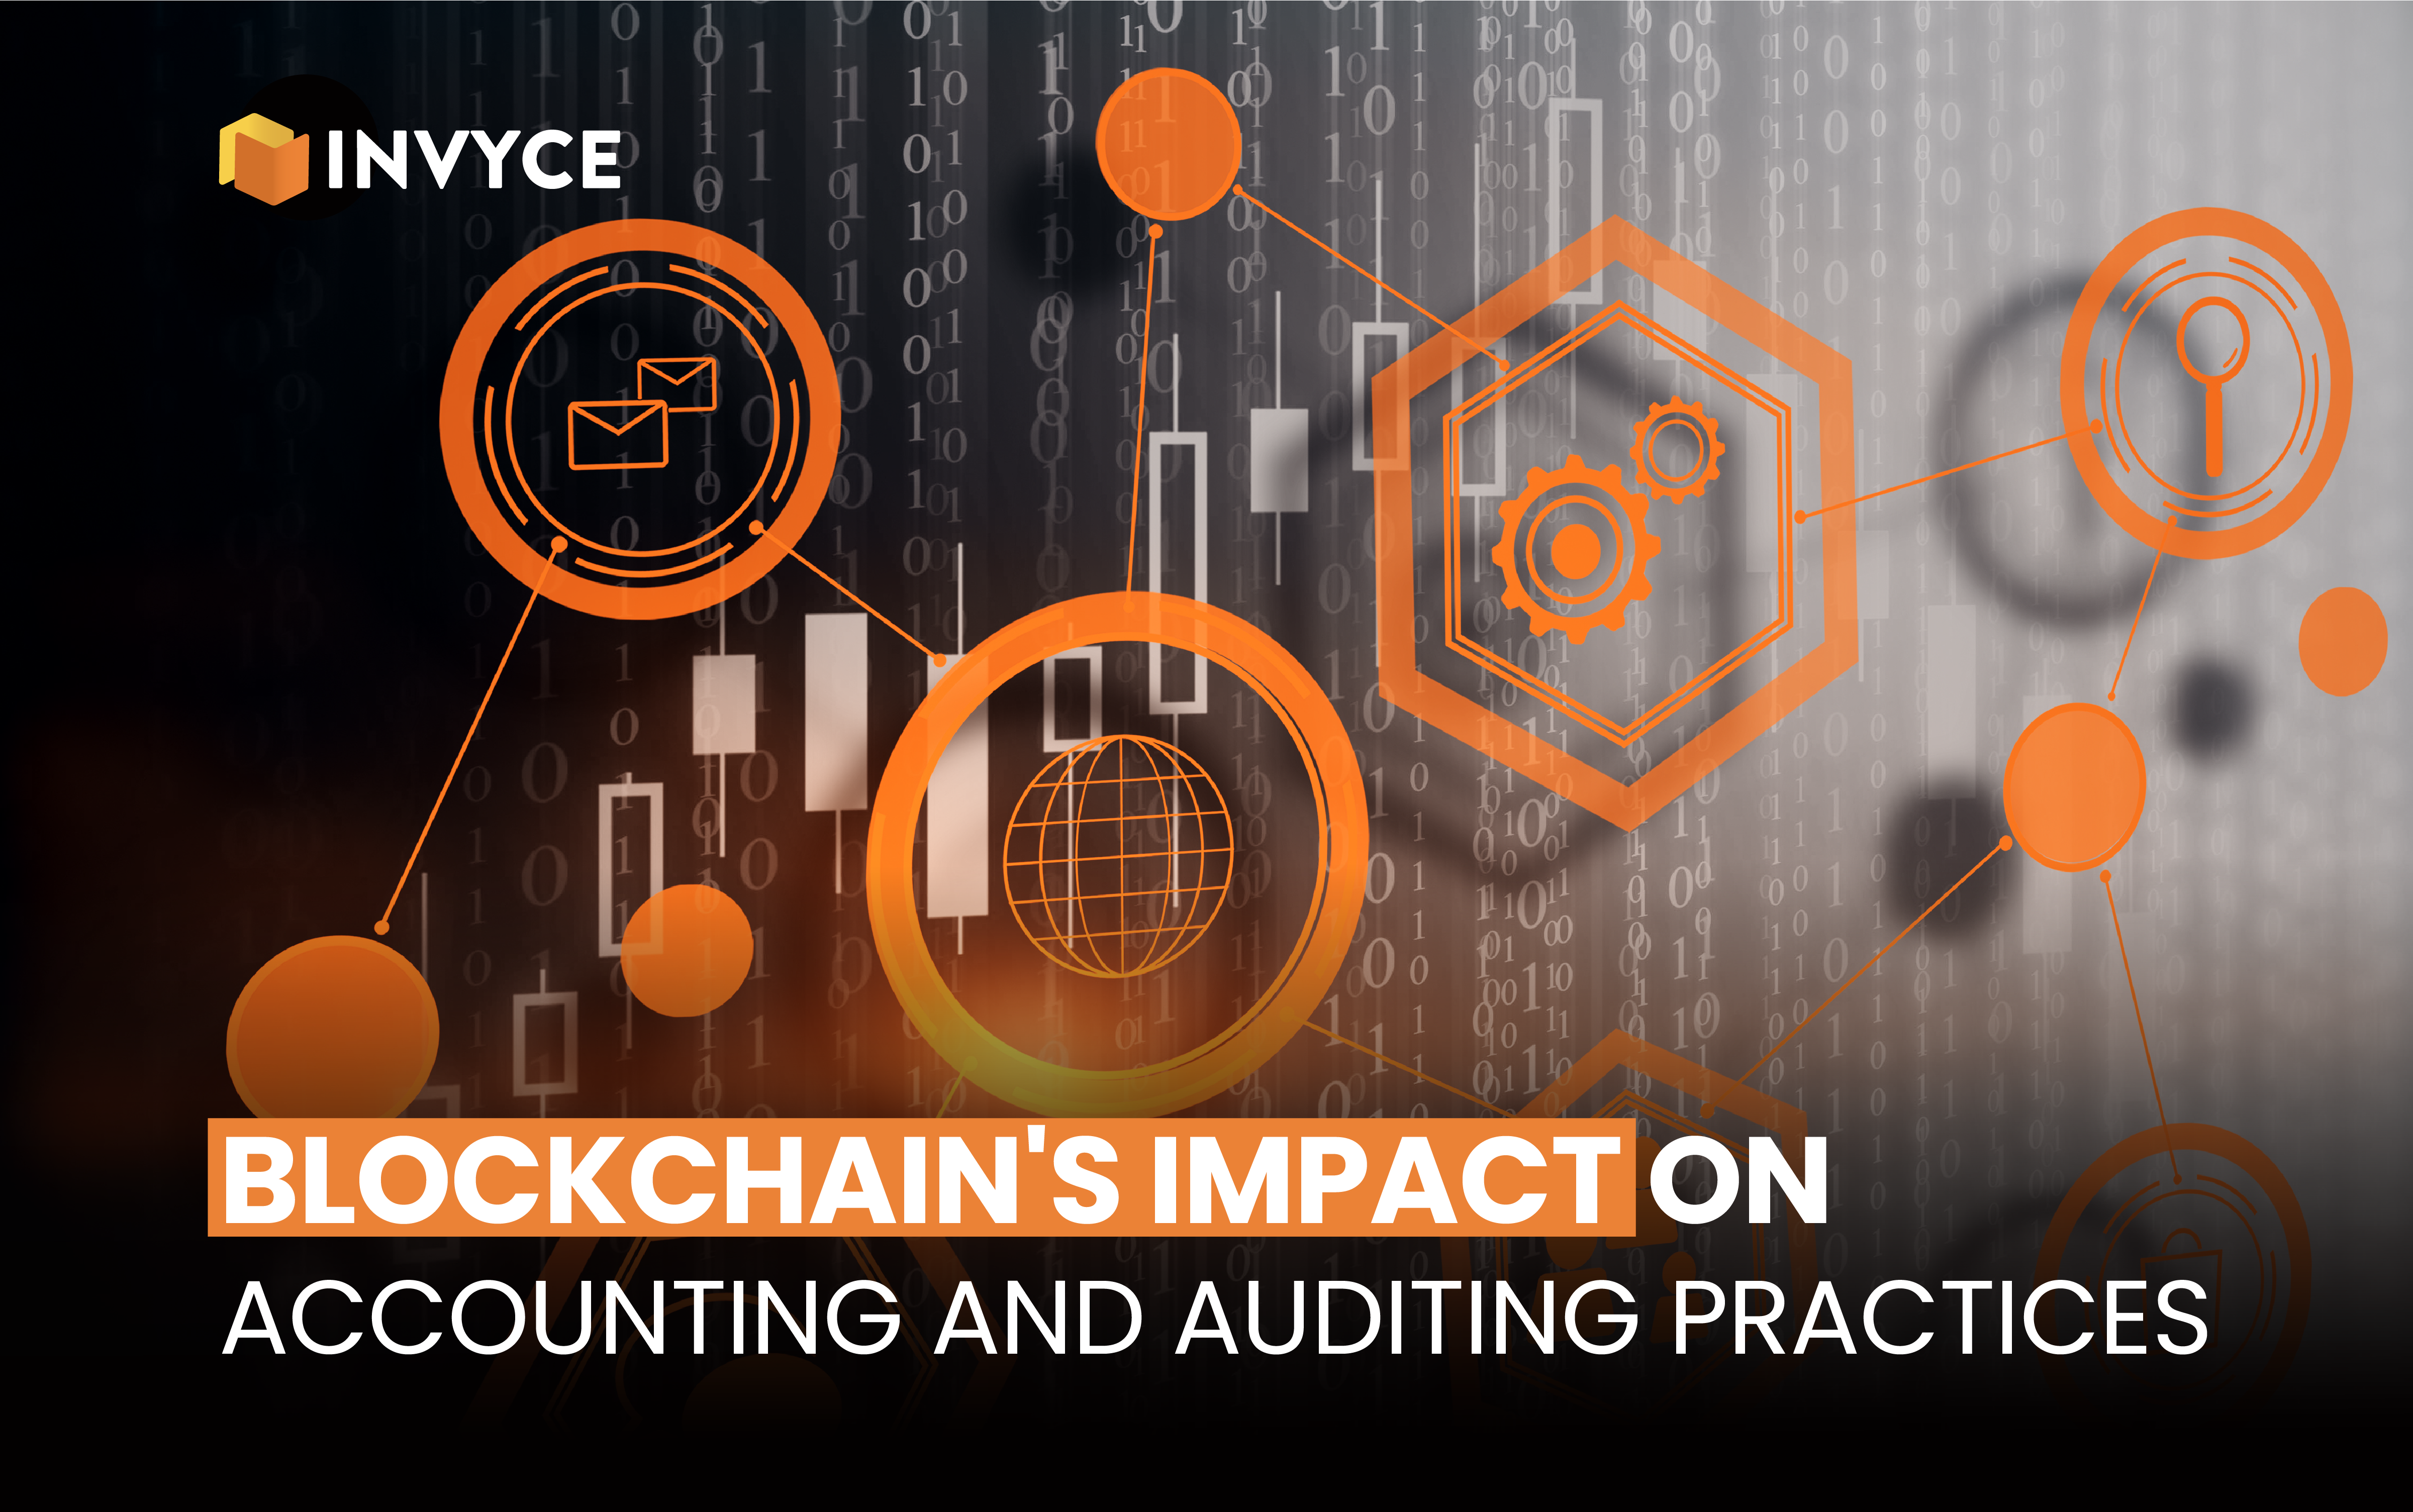 #Blockchain's Impact on Accounting and Auditing Practices